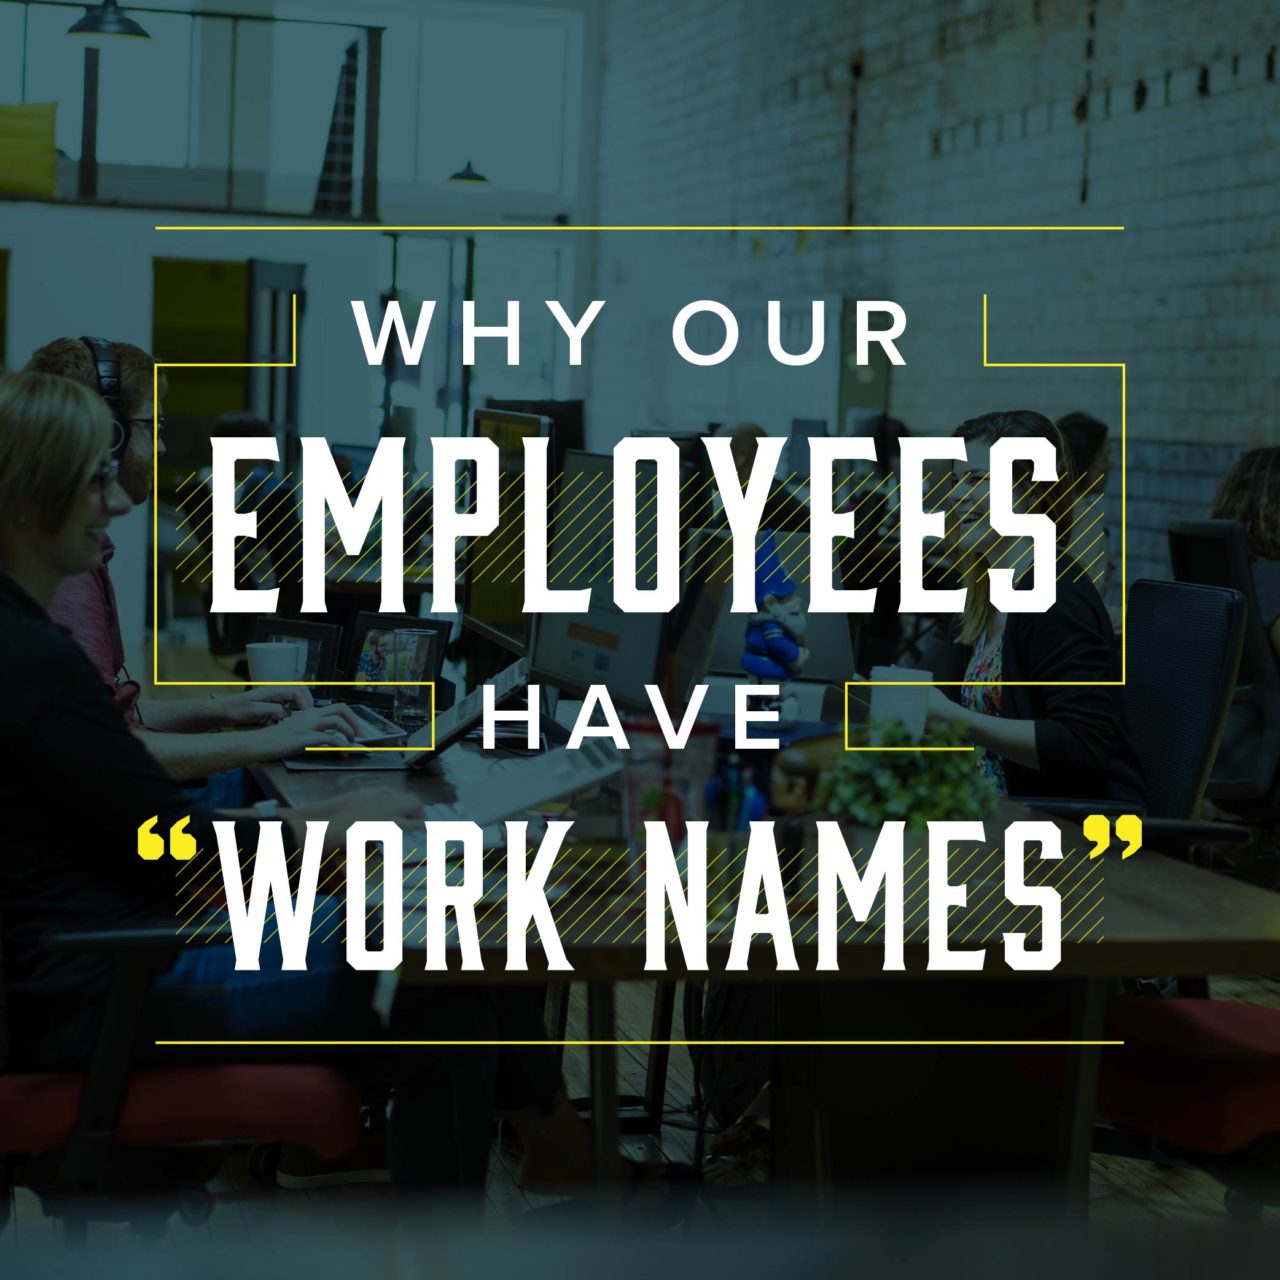 Why Our Employees Have "Work Names"